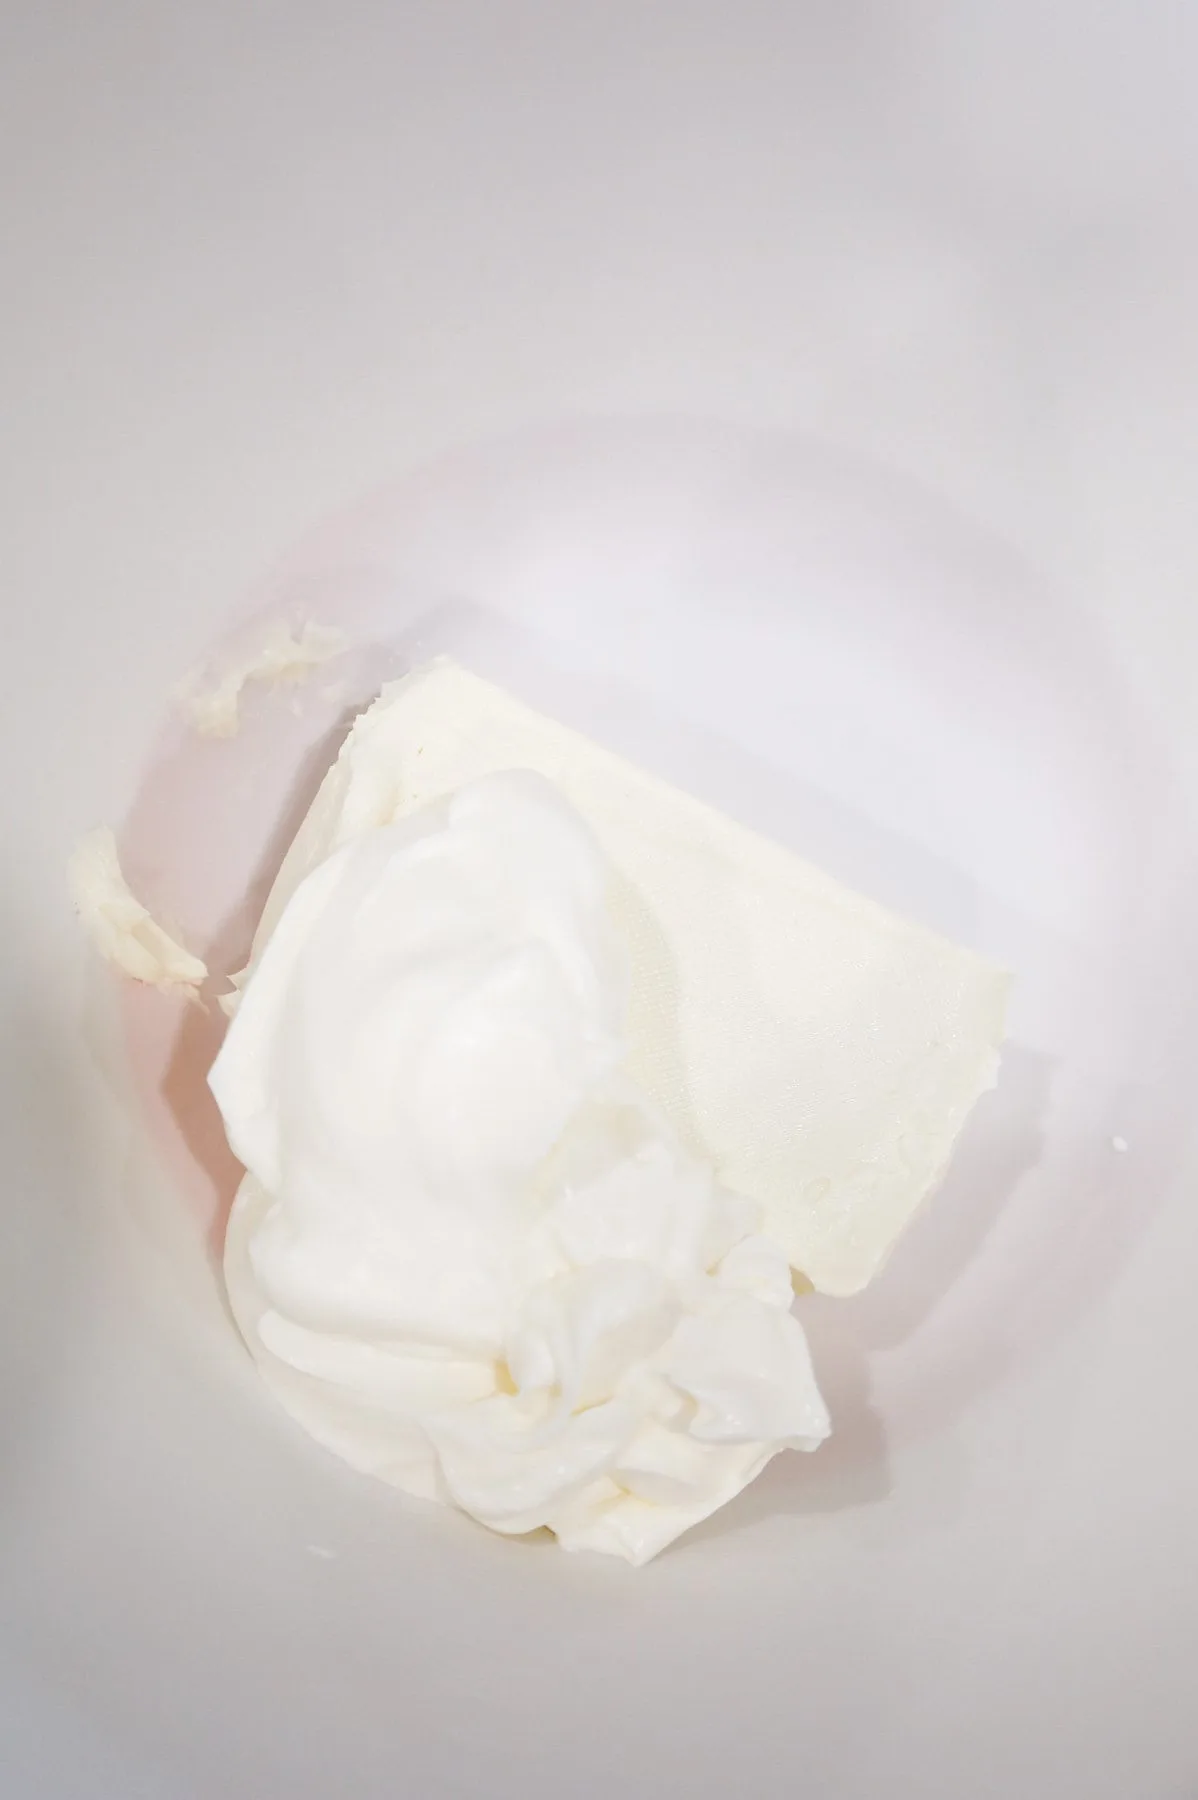 sour cream and cream cheese in a bowl